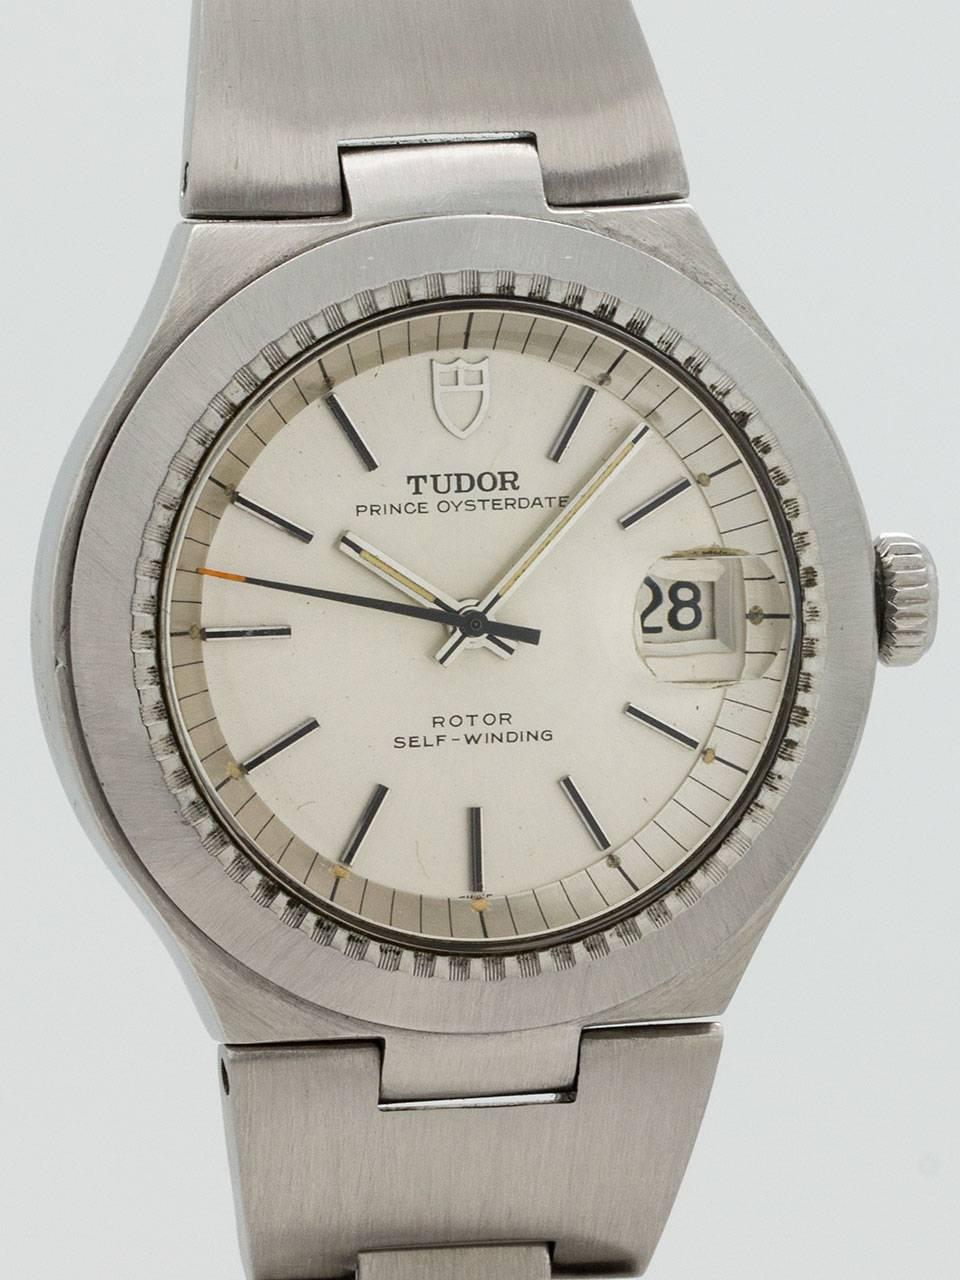 Tudor Prince Oysterdate ref 9101/0 circa 1973. Unusual and cool modern design tonneau shaped Oyster case with screw down Rolex crown, screw down case back, sloped bezel with engine turn inner pattern and acrylic crystal. Original silvered satin dial